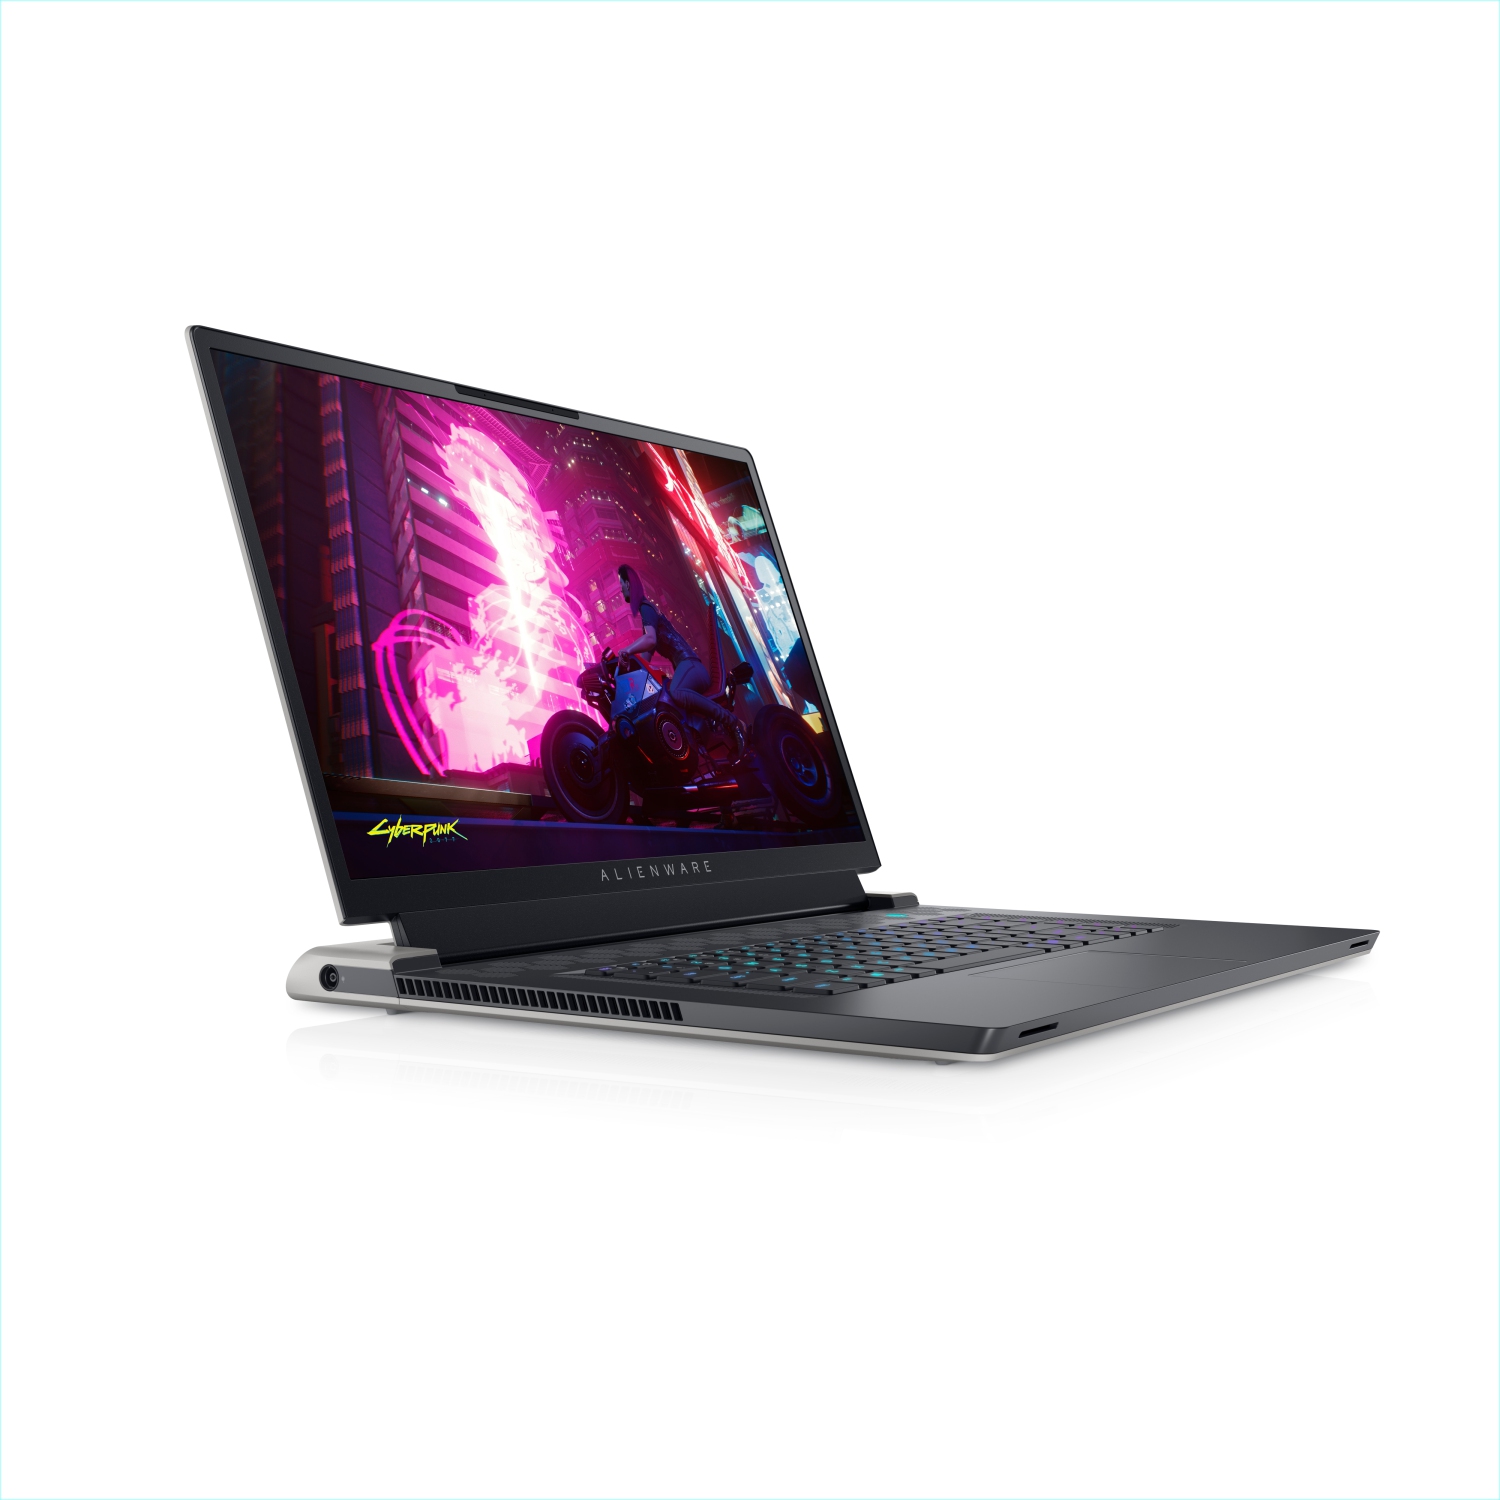 Refurbished (Excellent) - Dell Alienware X17 R1 Gaming Laptop (2021), 17.3" FHD, Core i9, 512GB SSD, 16GB RAM, RTX 3080, 8 Cores @ 5 GHz, 11th Gen CPU Certified